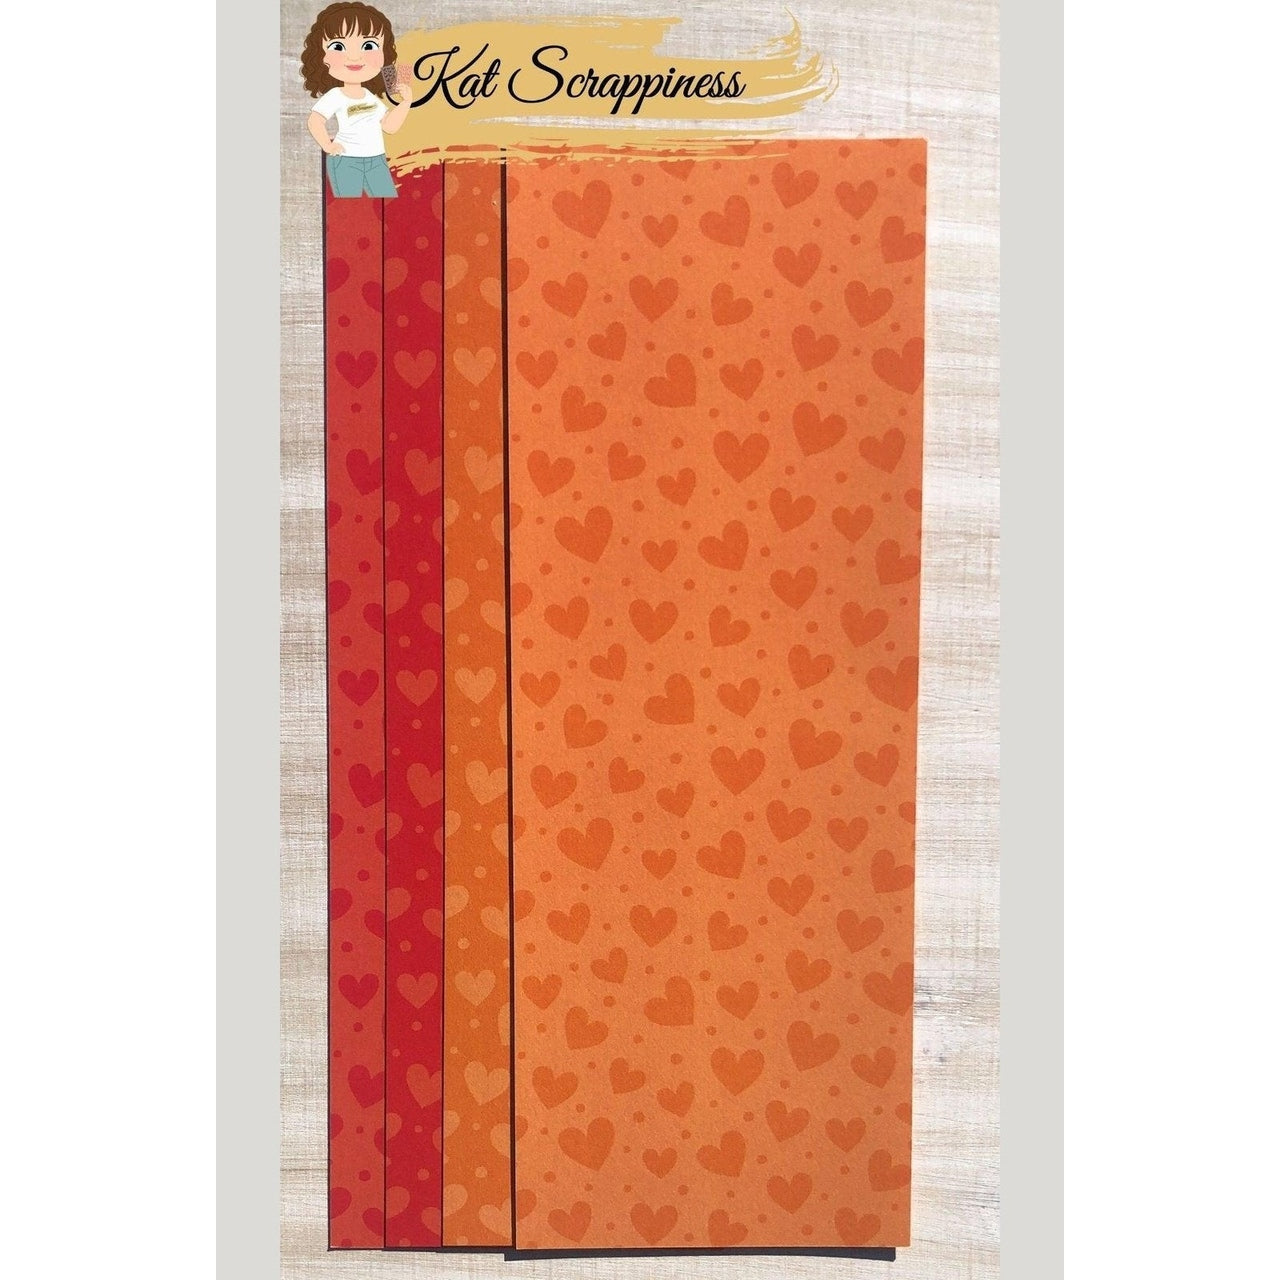 Spectrum of Love 6x8 Paper Pad - Clearance - RETIRING!